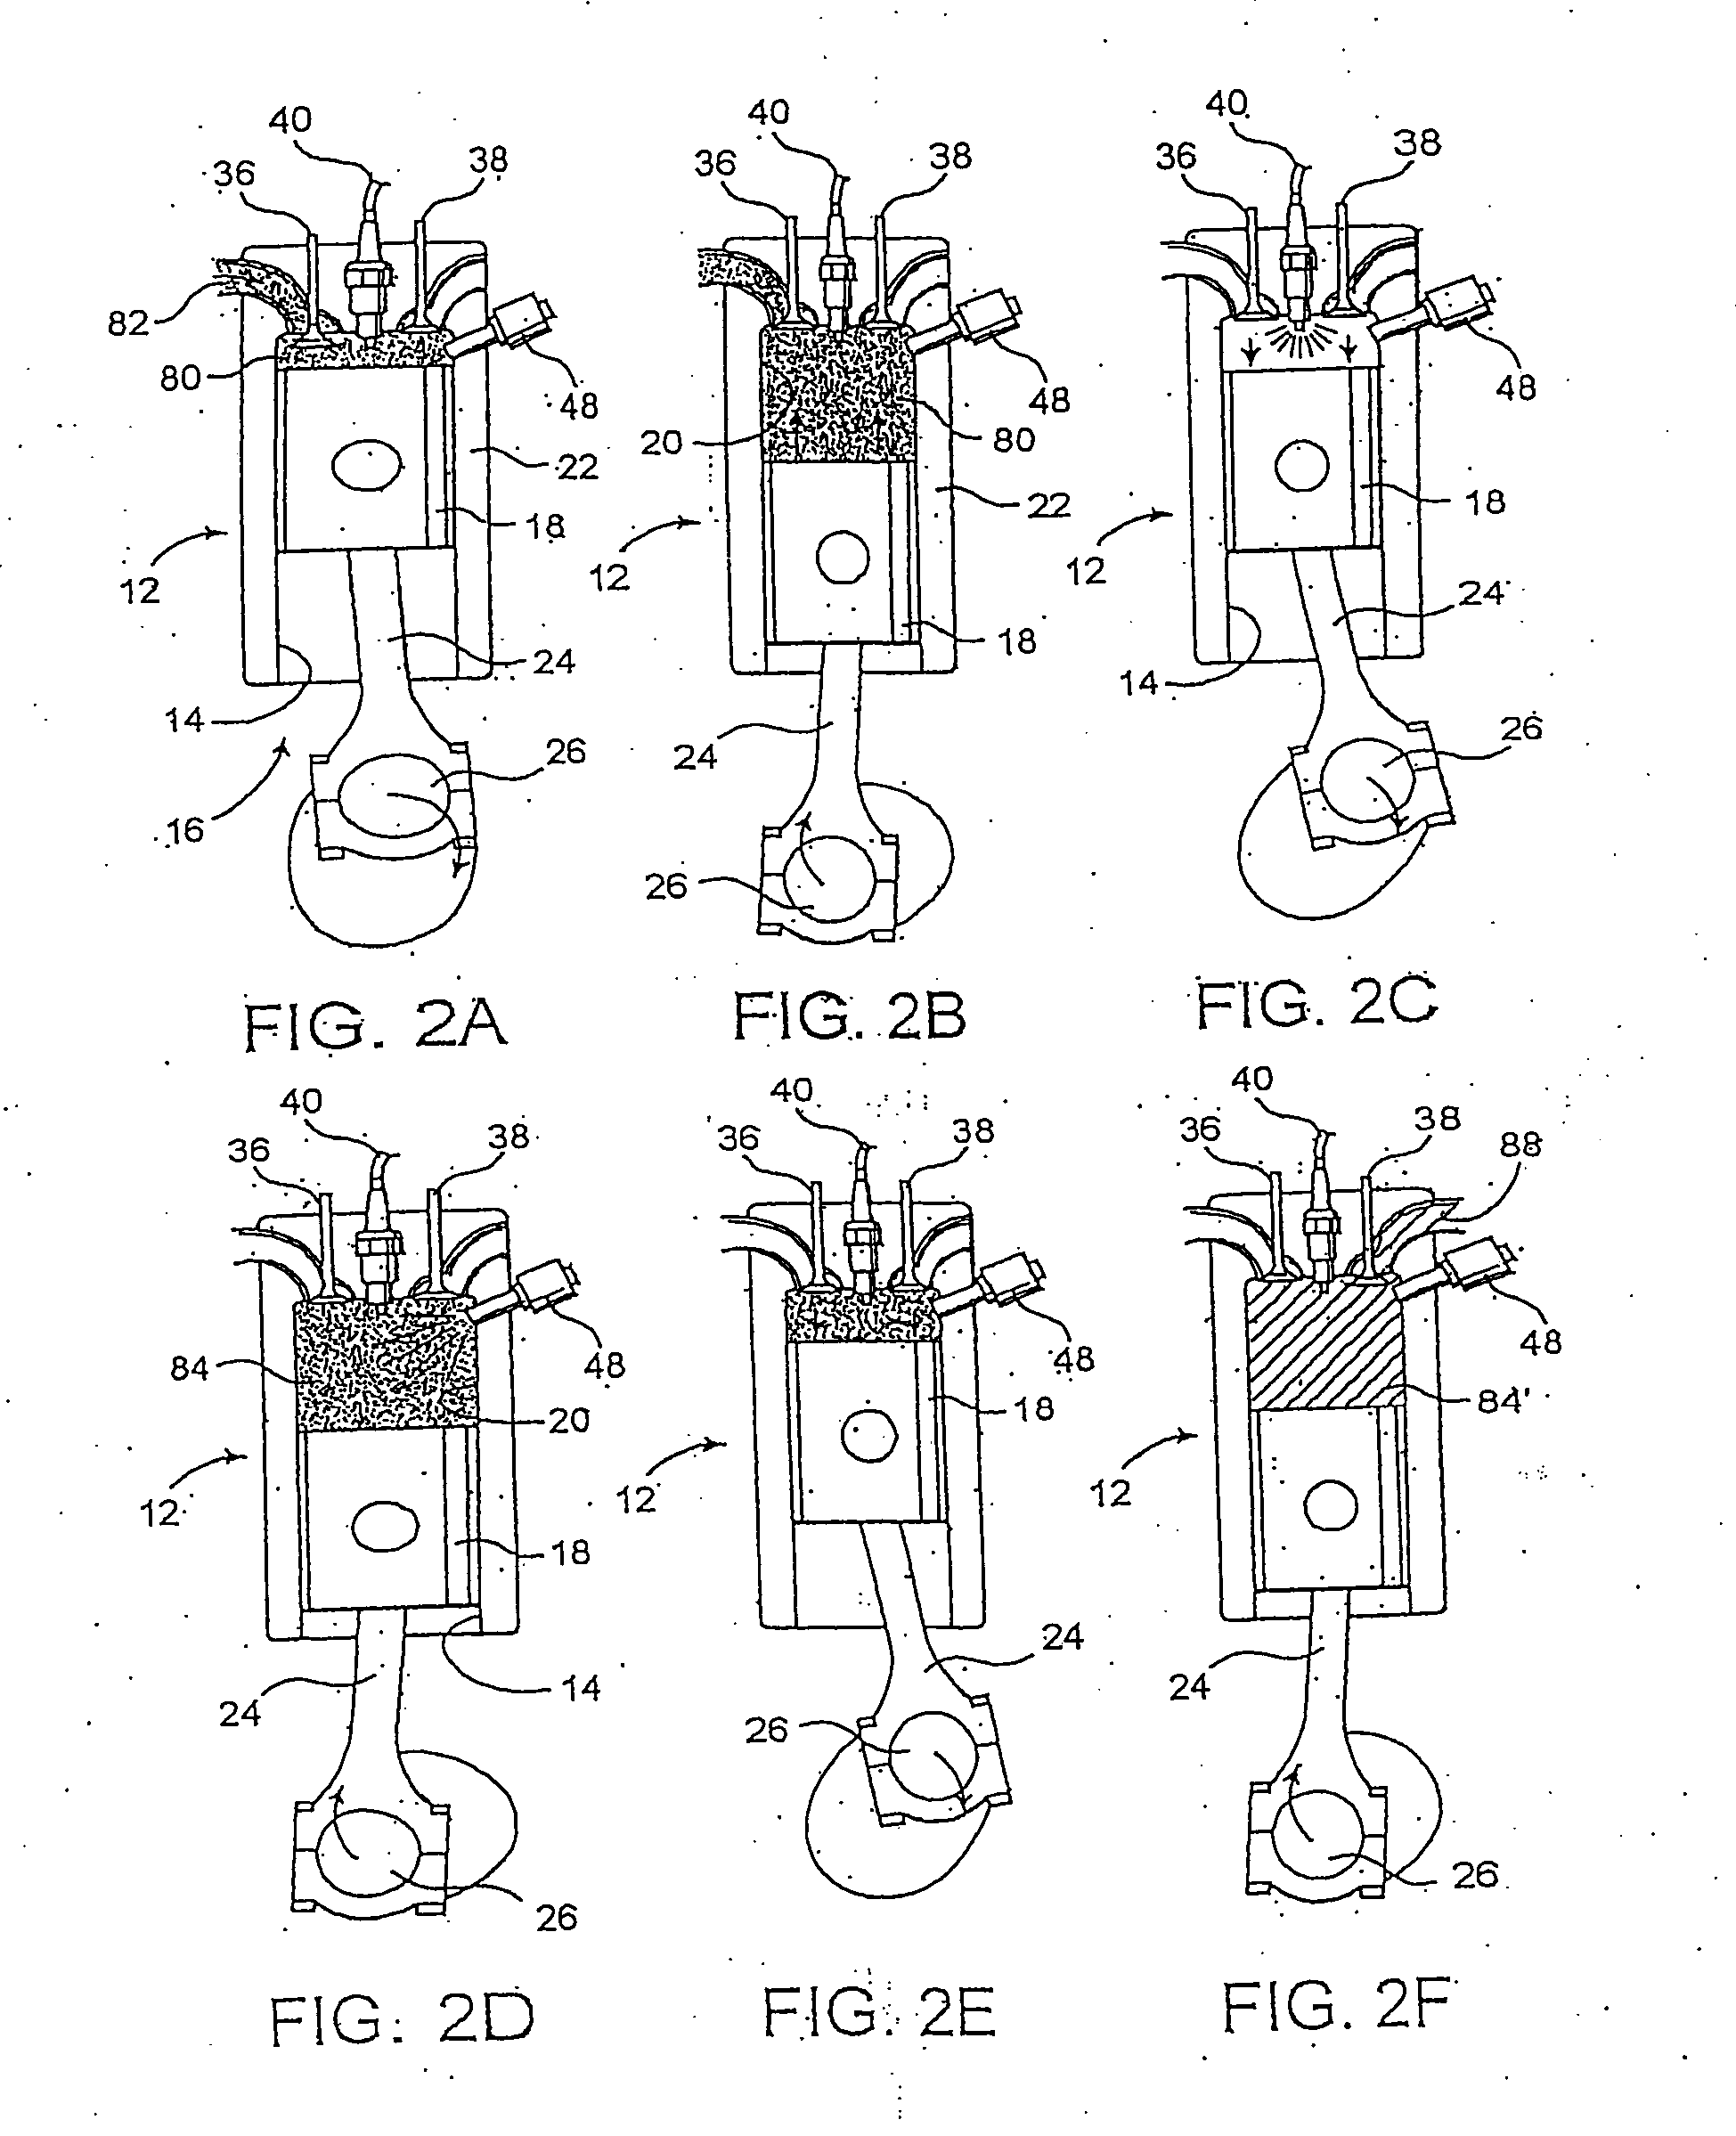 System and method for recovering wasted energy from an internal combustion engine